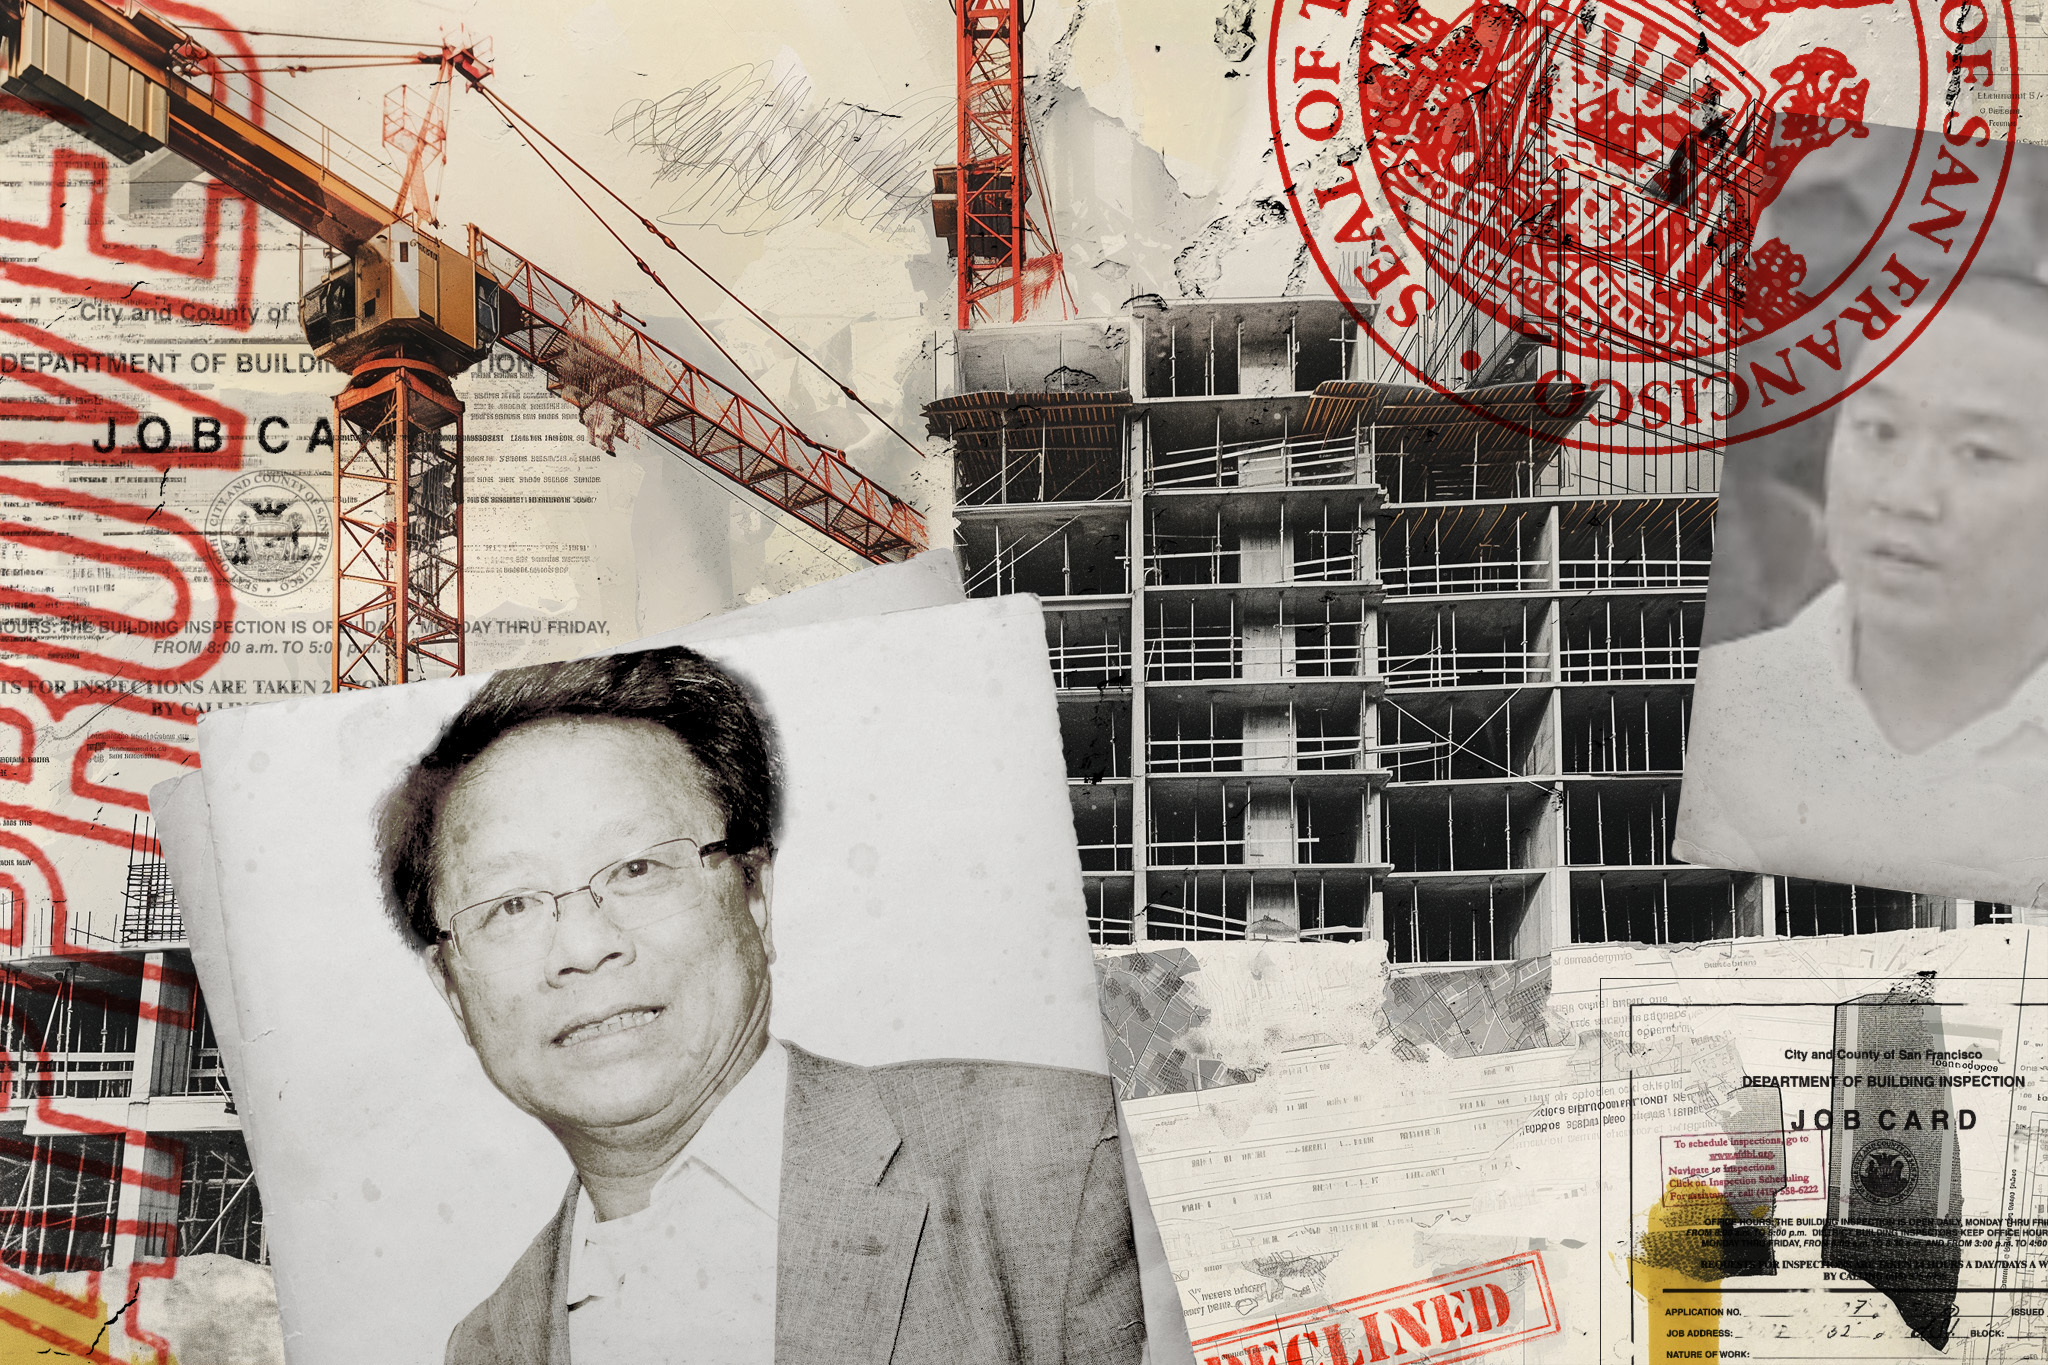 A collage with a man's portrait, construction site, crane and building permits.